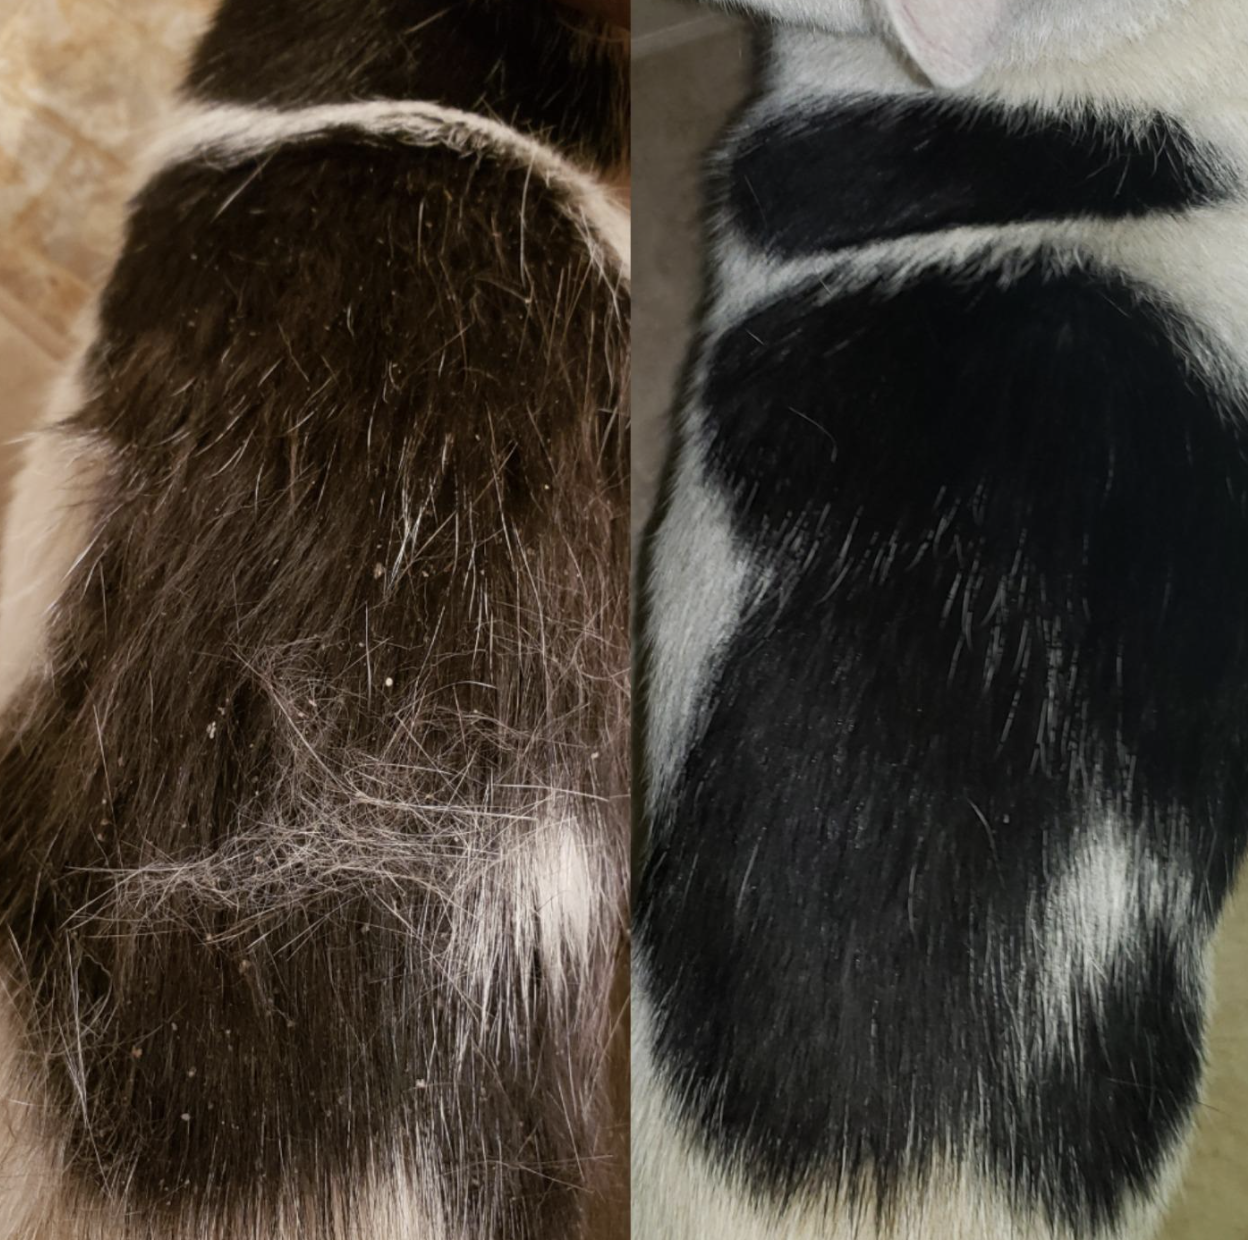 On the left, a reviewer&#x27;s cat&#x27;s fur with white specks of dry skin, and on the right, the same cat&#x27;s fur now clear of the specks